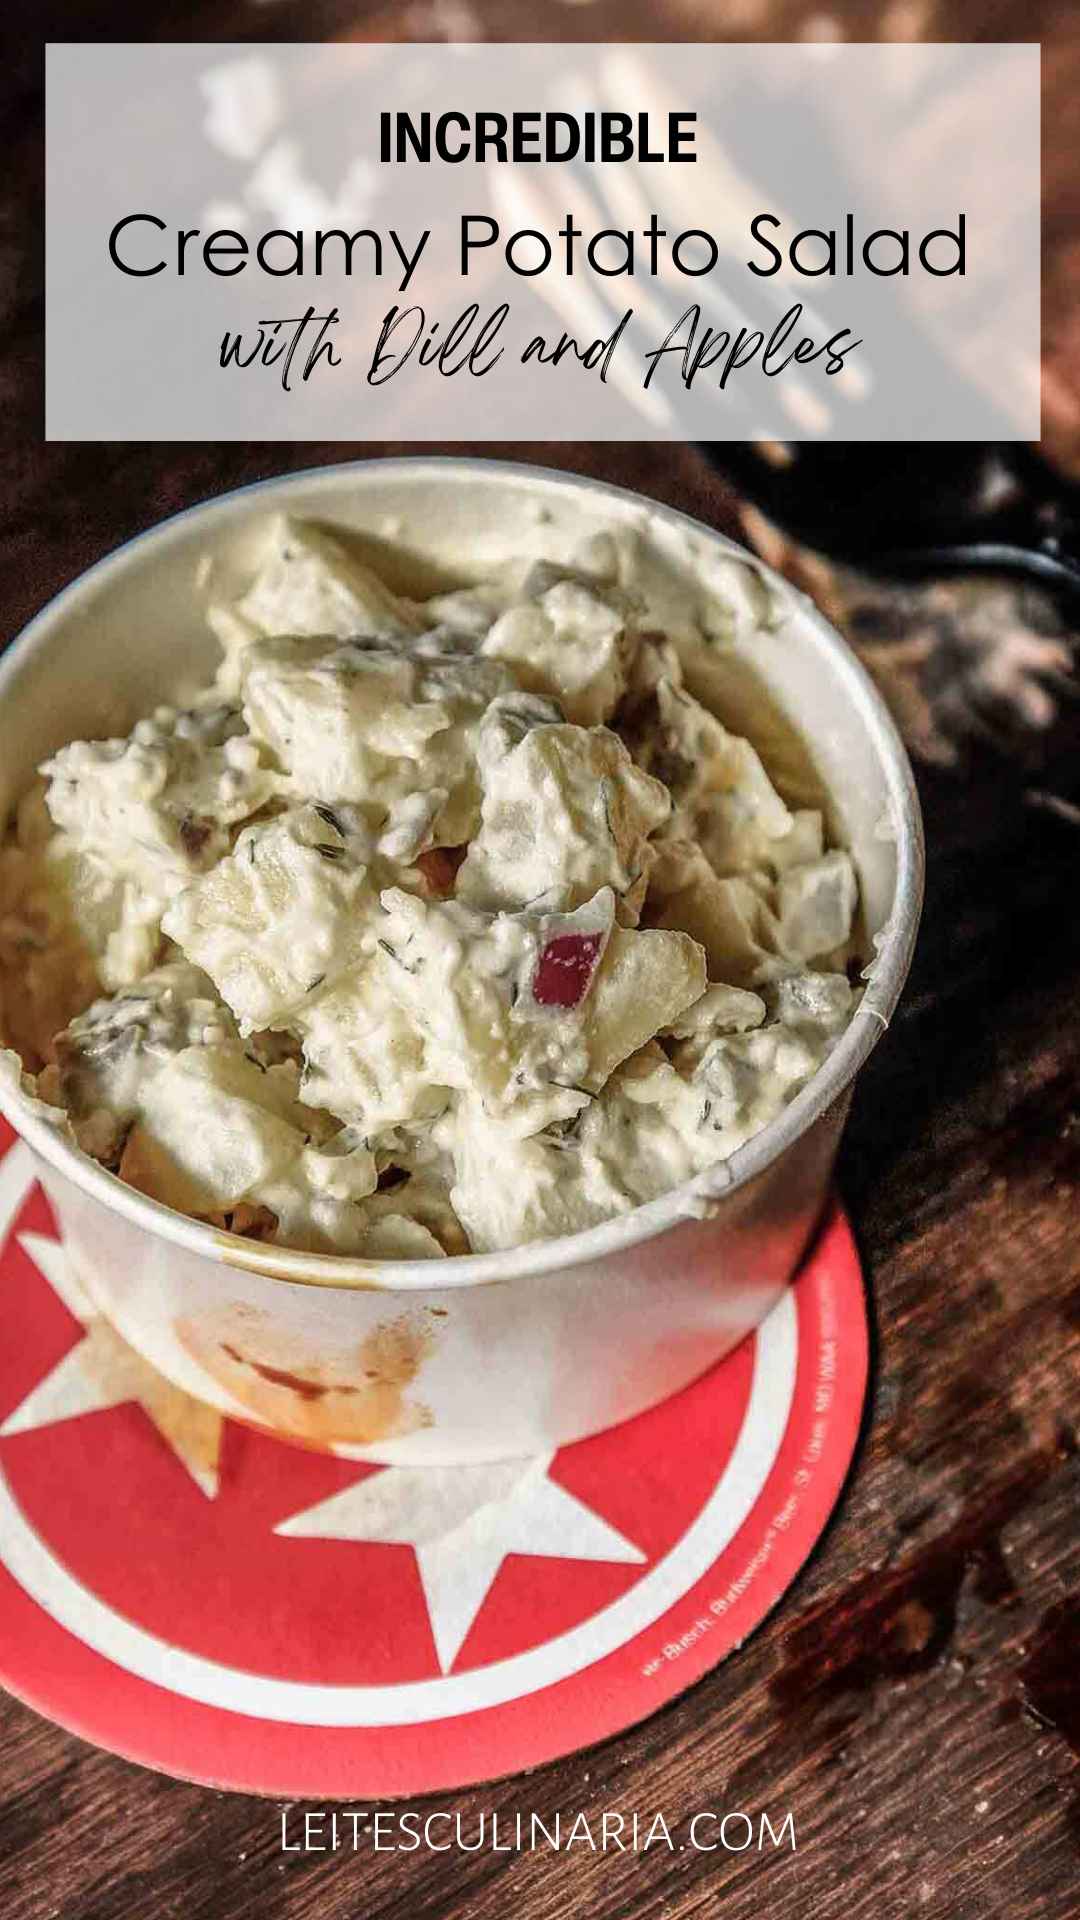 A container of creamy potato salad with apples, red onion, and dill on a red and white coaster.